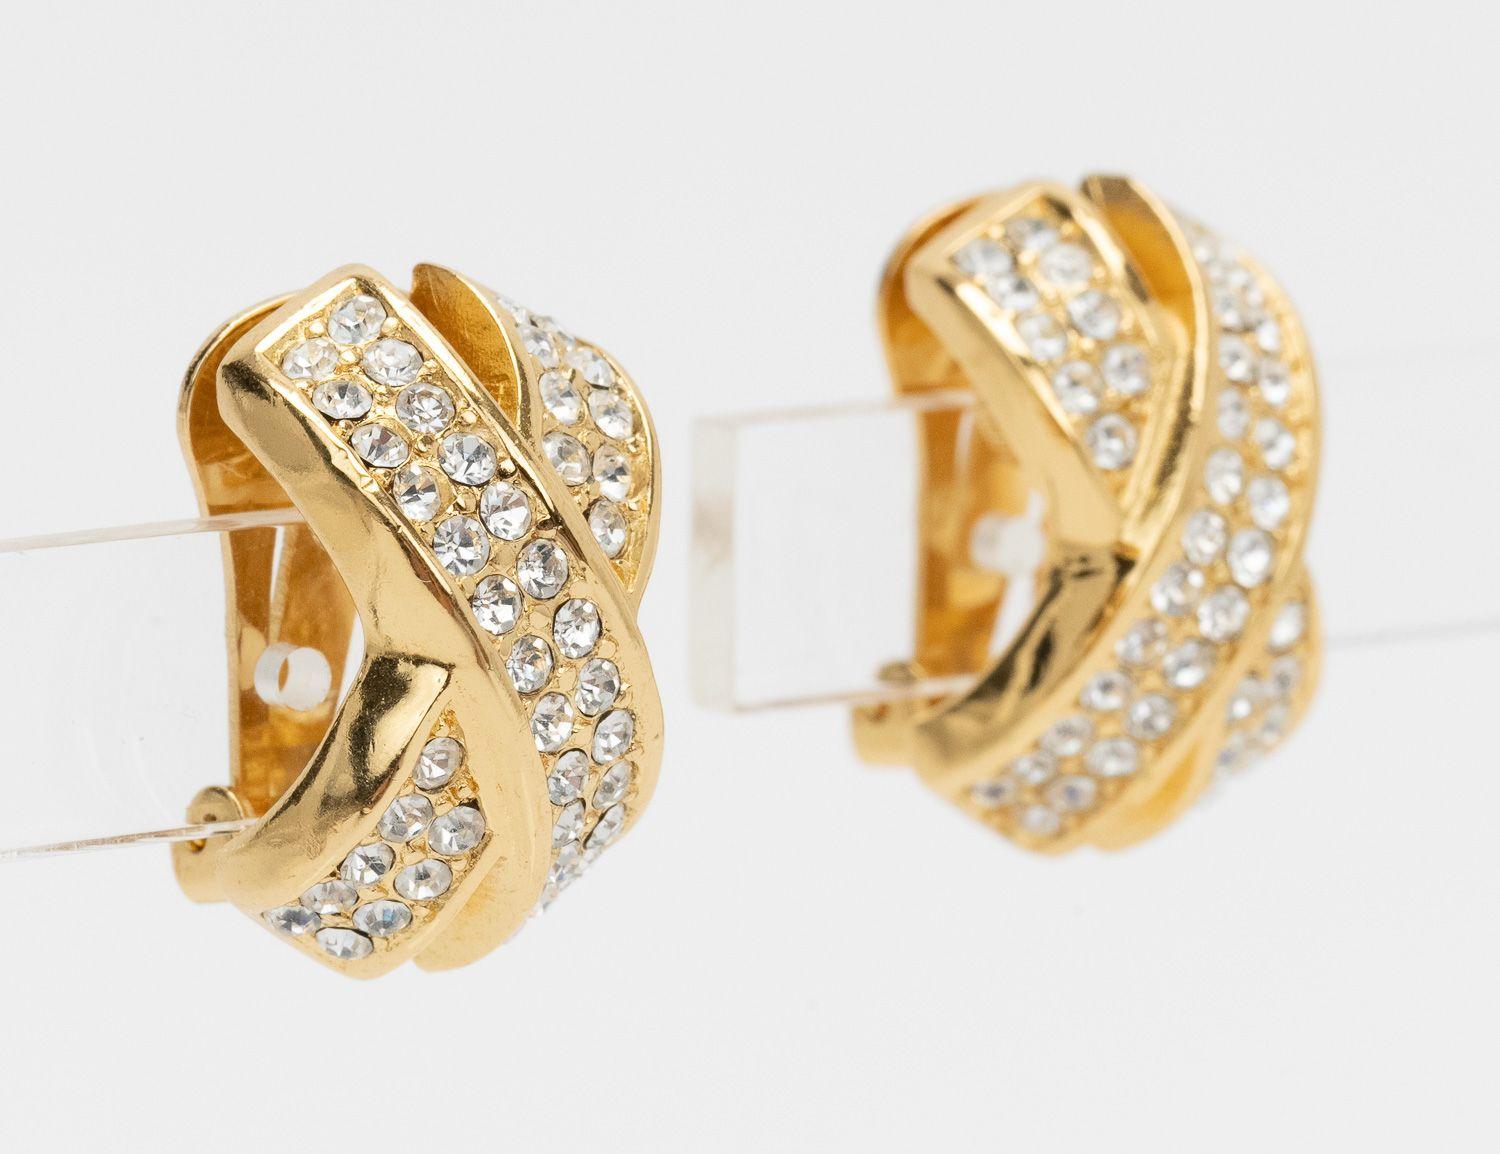 Christian Dior earrings in form of crossing bands in gold metal with rhinestones. In excellent condition.